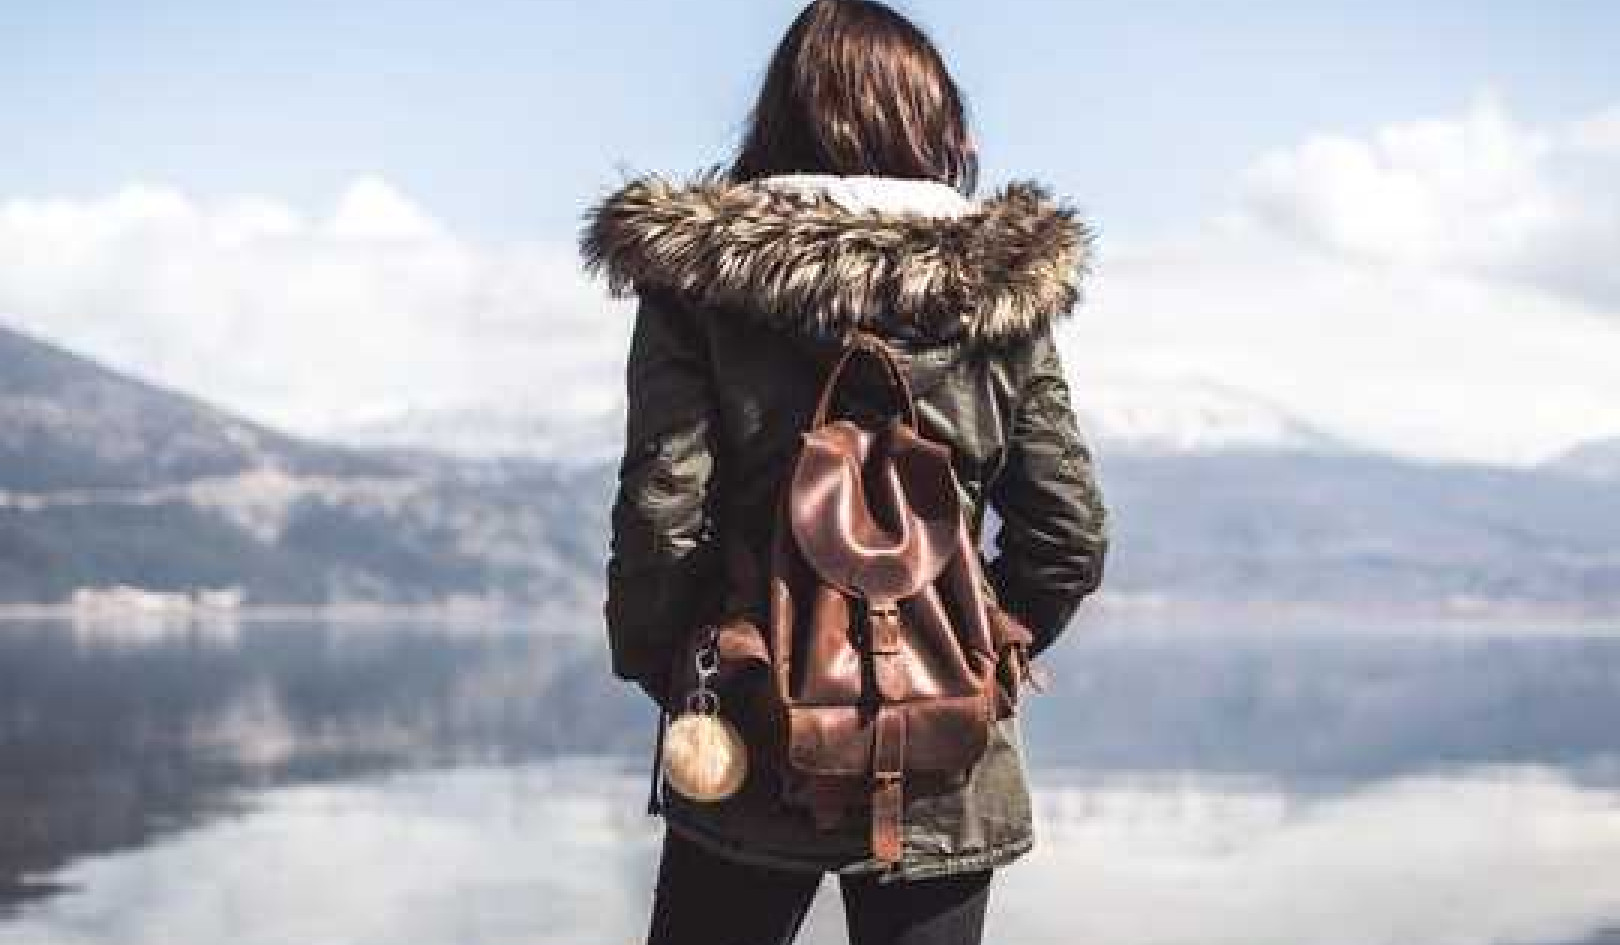 Lady Backpacks and Manly Beer — The Folly Of Gendered Products